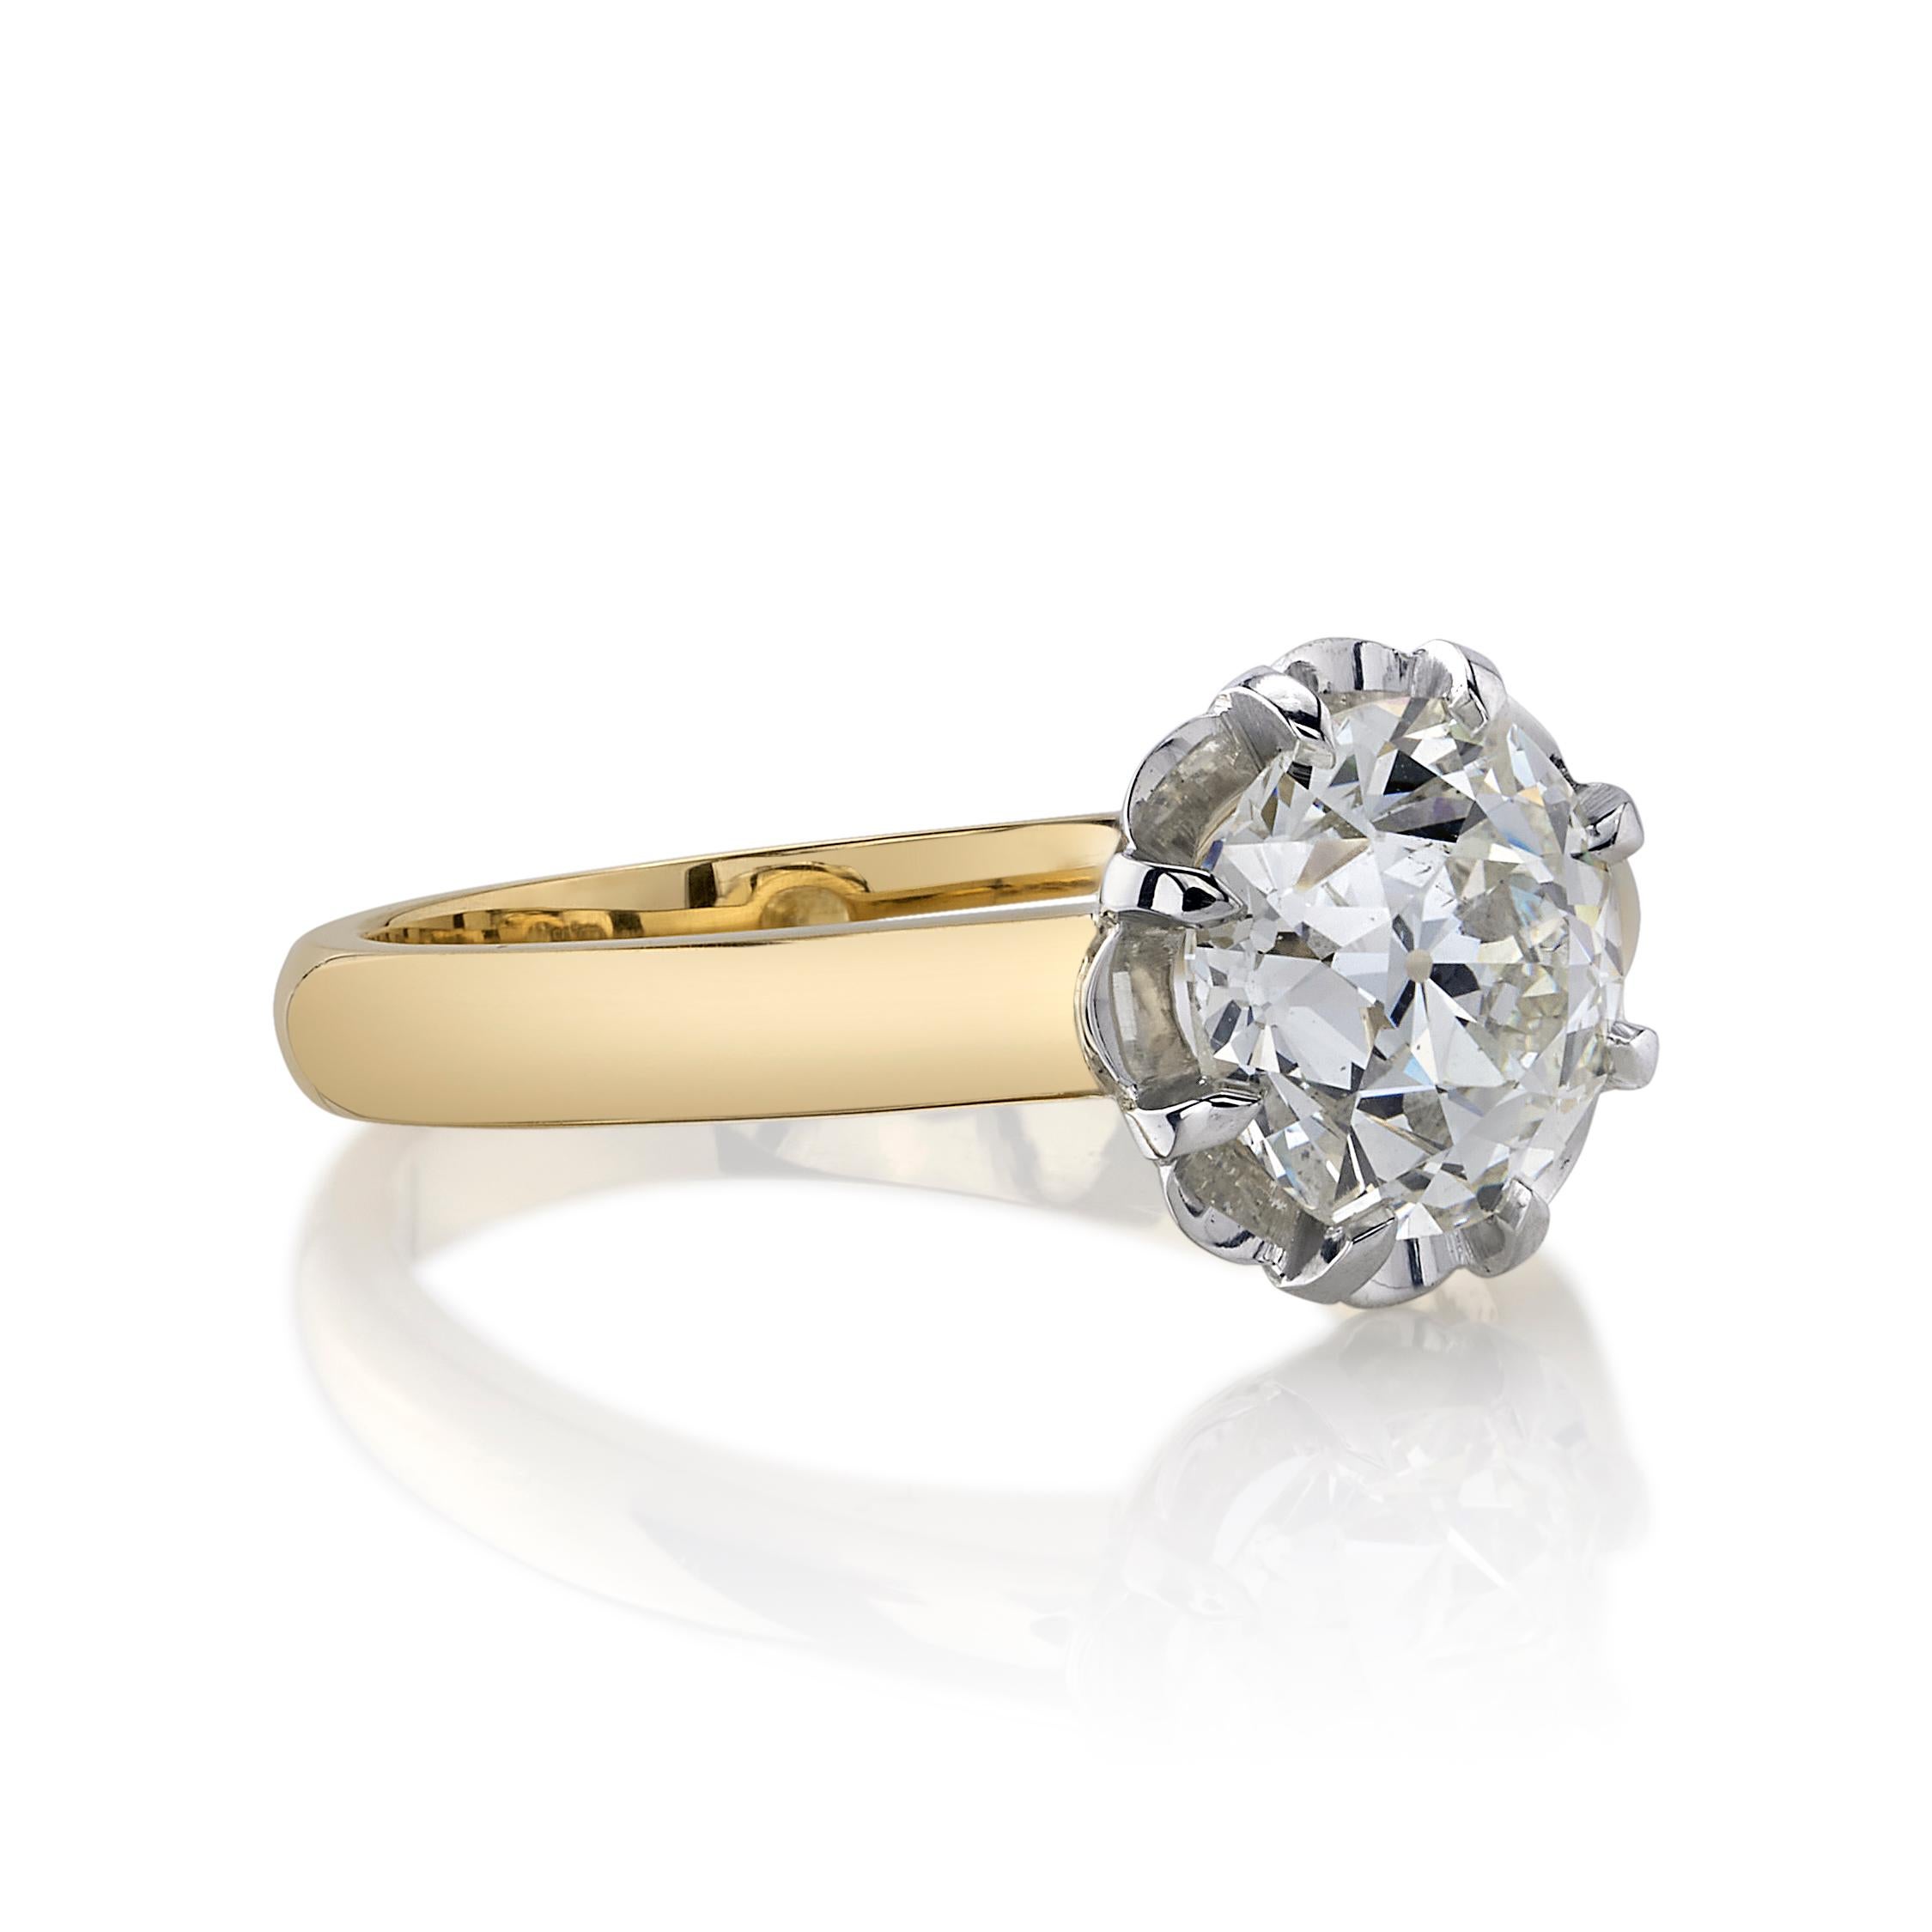 1.23ct M/VS2 GIA certified old European cut diamond set in a handcrafted 18K yellow gold and platinum mounting. 

Ring is currently a size 6 and can be sized to fit. 

Our jewelry is made locally in Los Angeles and most pieces are made to order. For